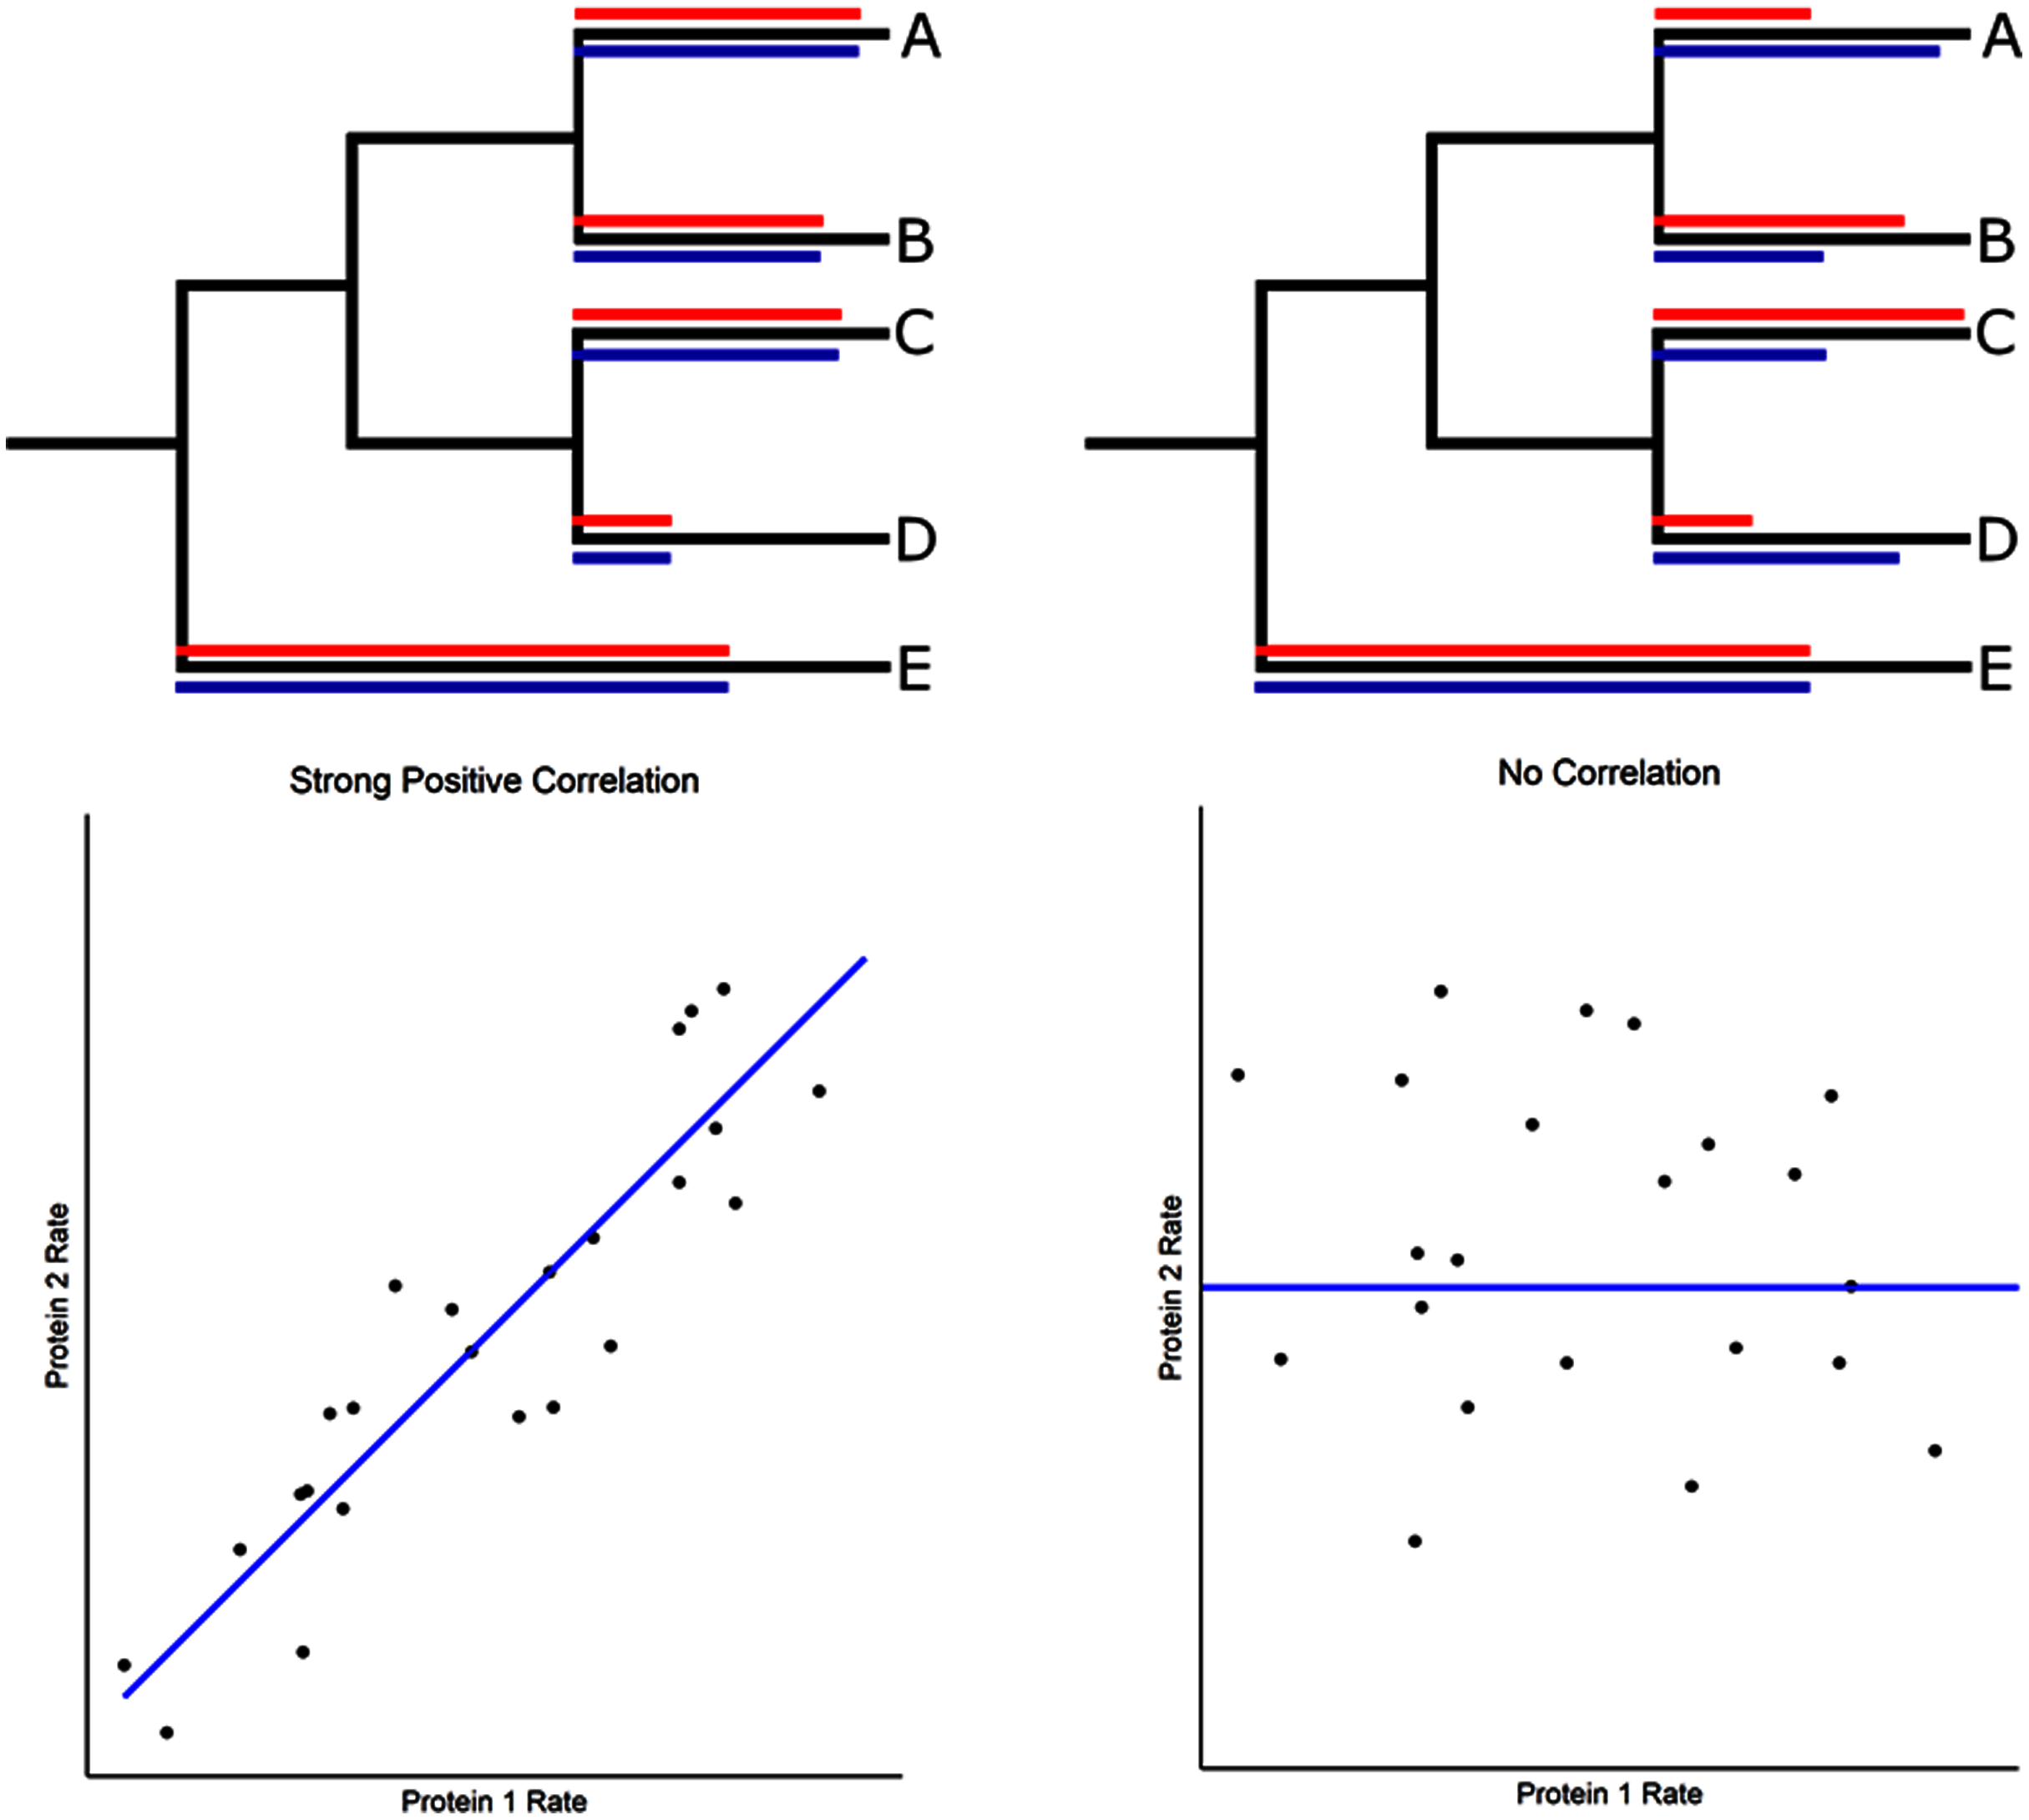 Novel ACE2 protein interactions relevant to COVID-19 predicted by evolutionary rate correlations PeerJ